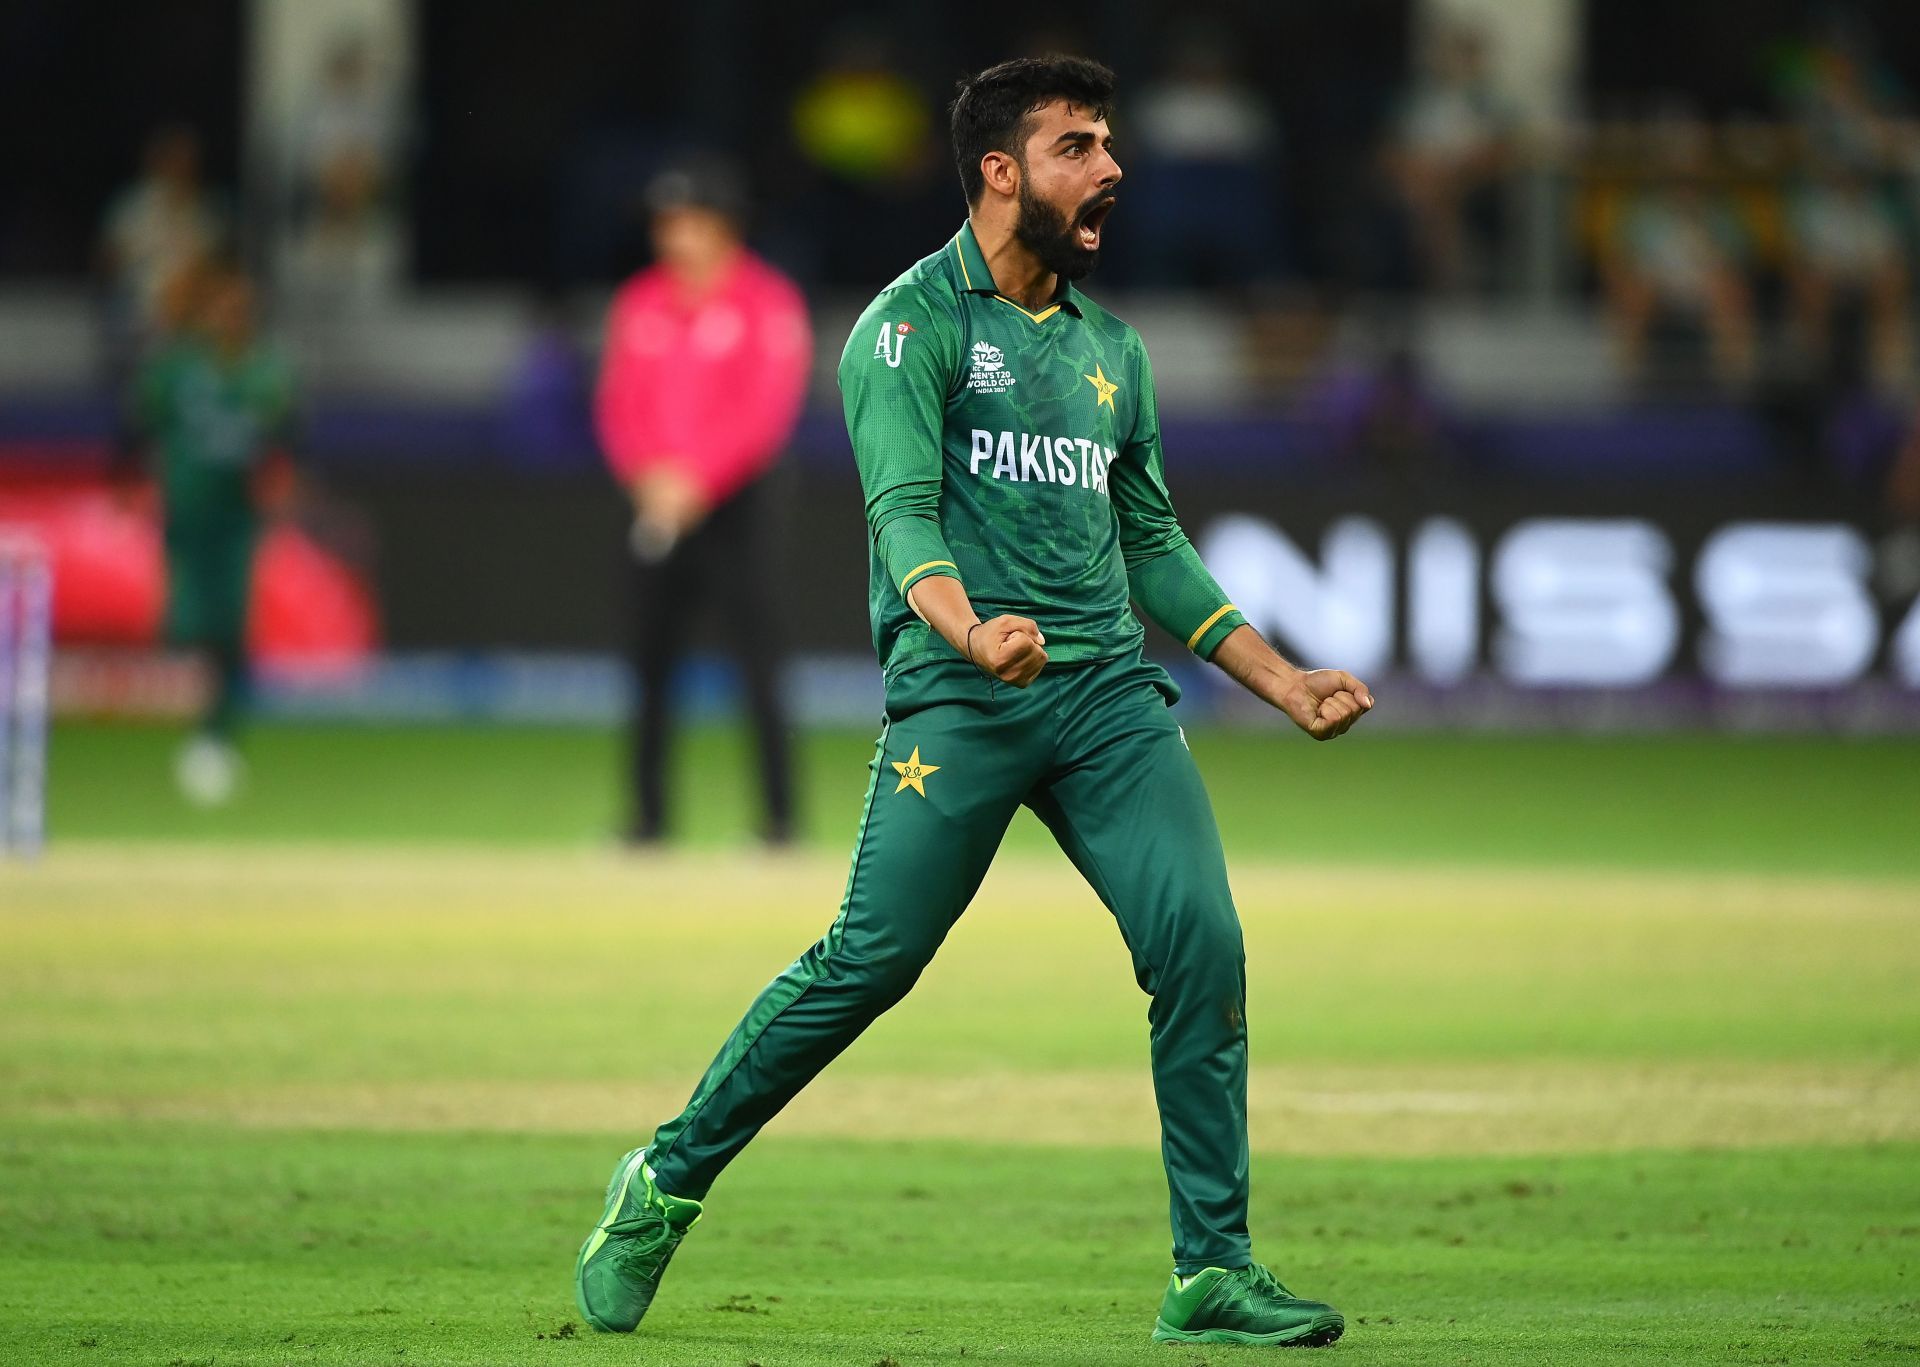 Shadab Khan took nine wickets in six games in the 2021 T20 World Cup. (Credits: Getty)